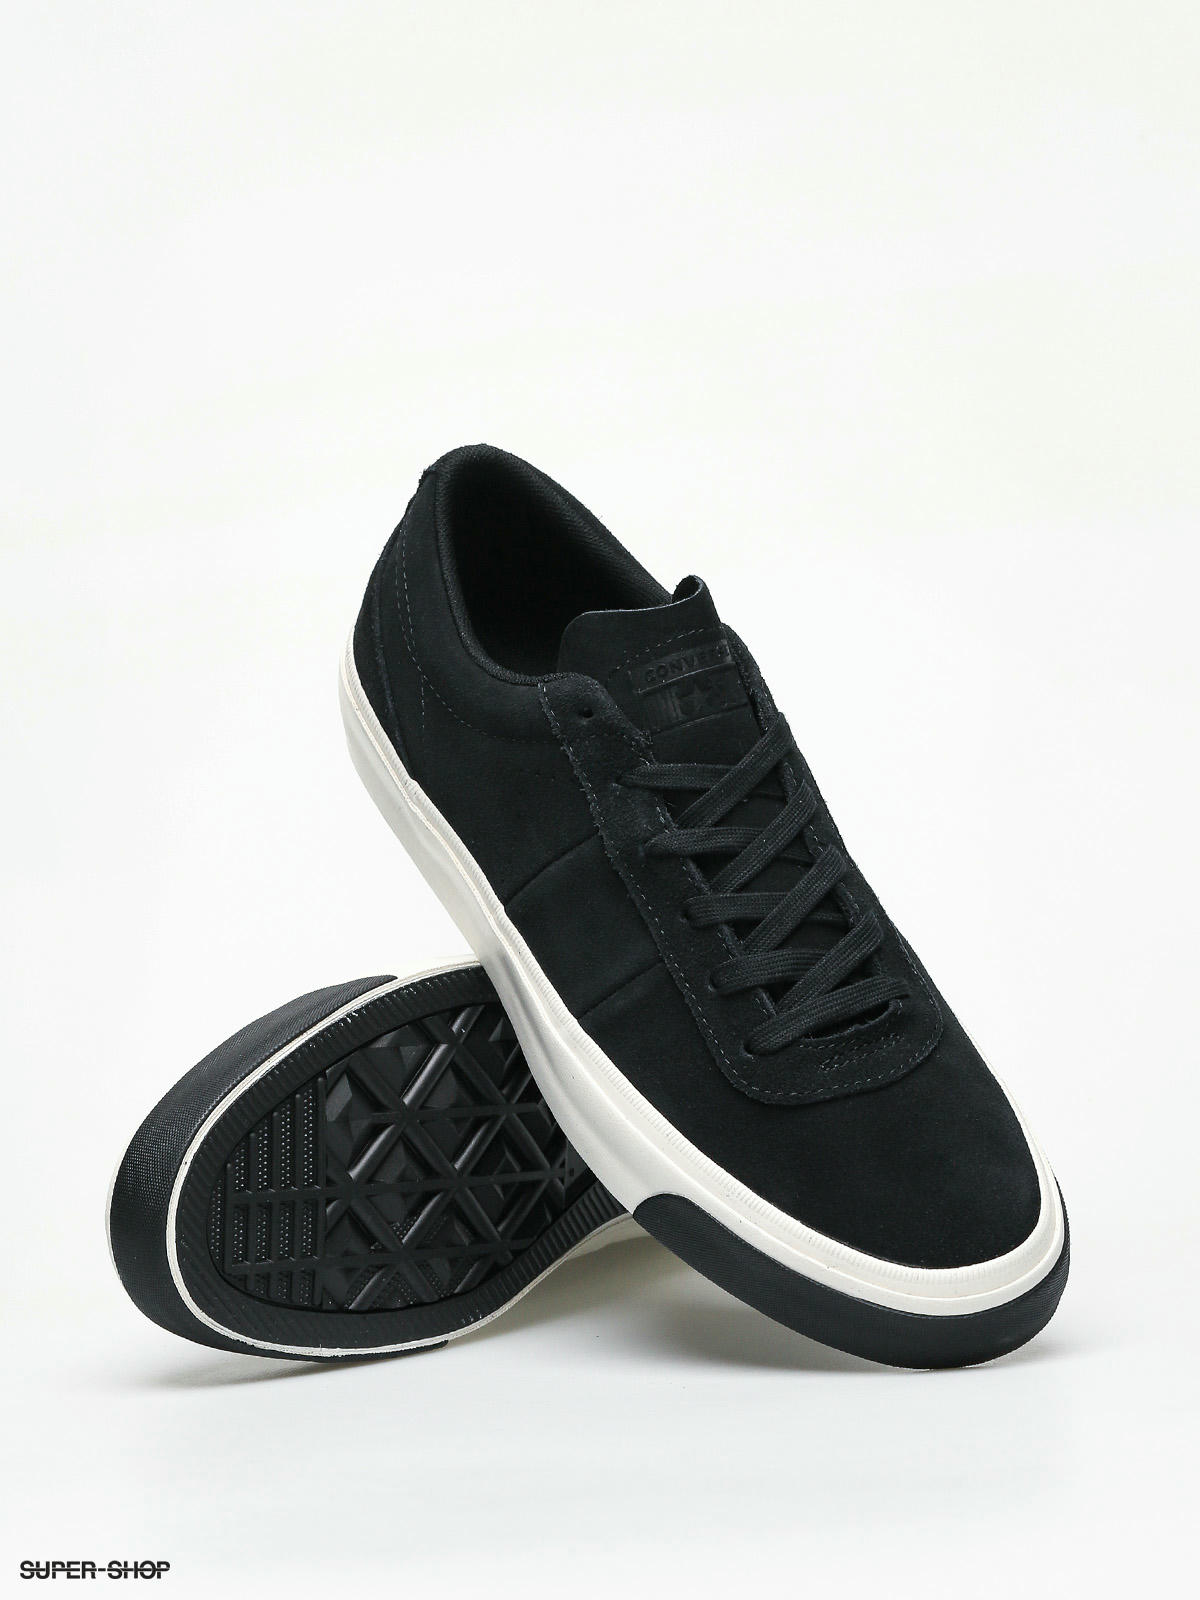 converse lifestyle one star ox suede